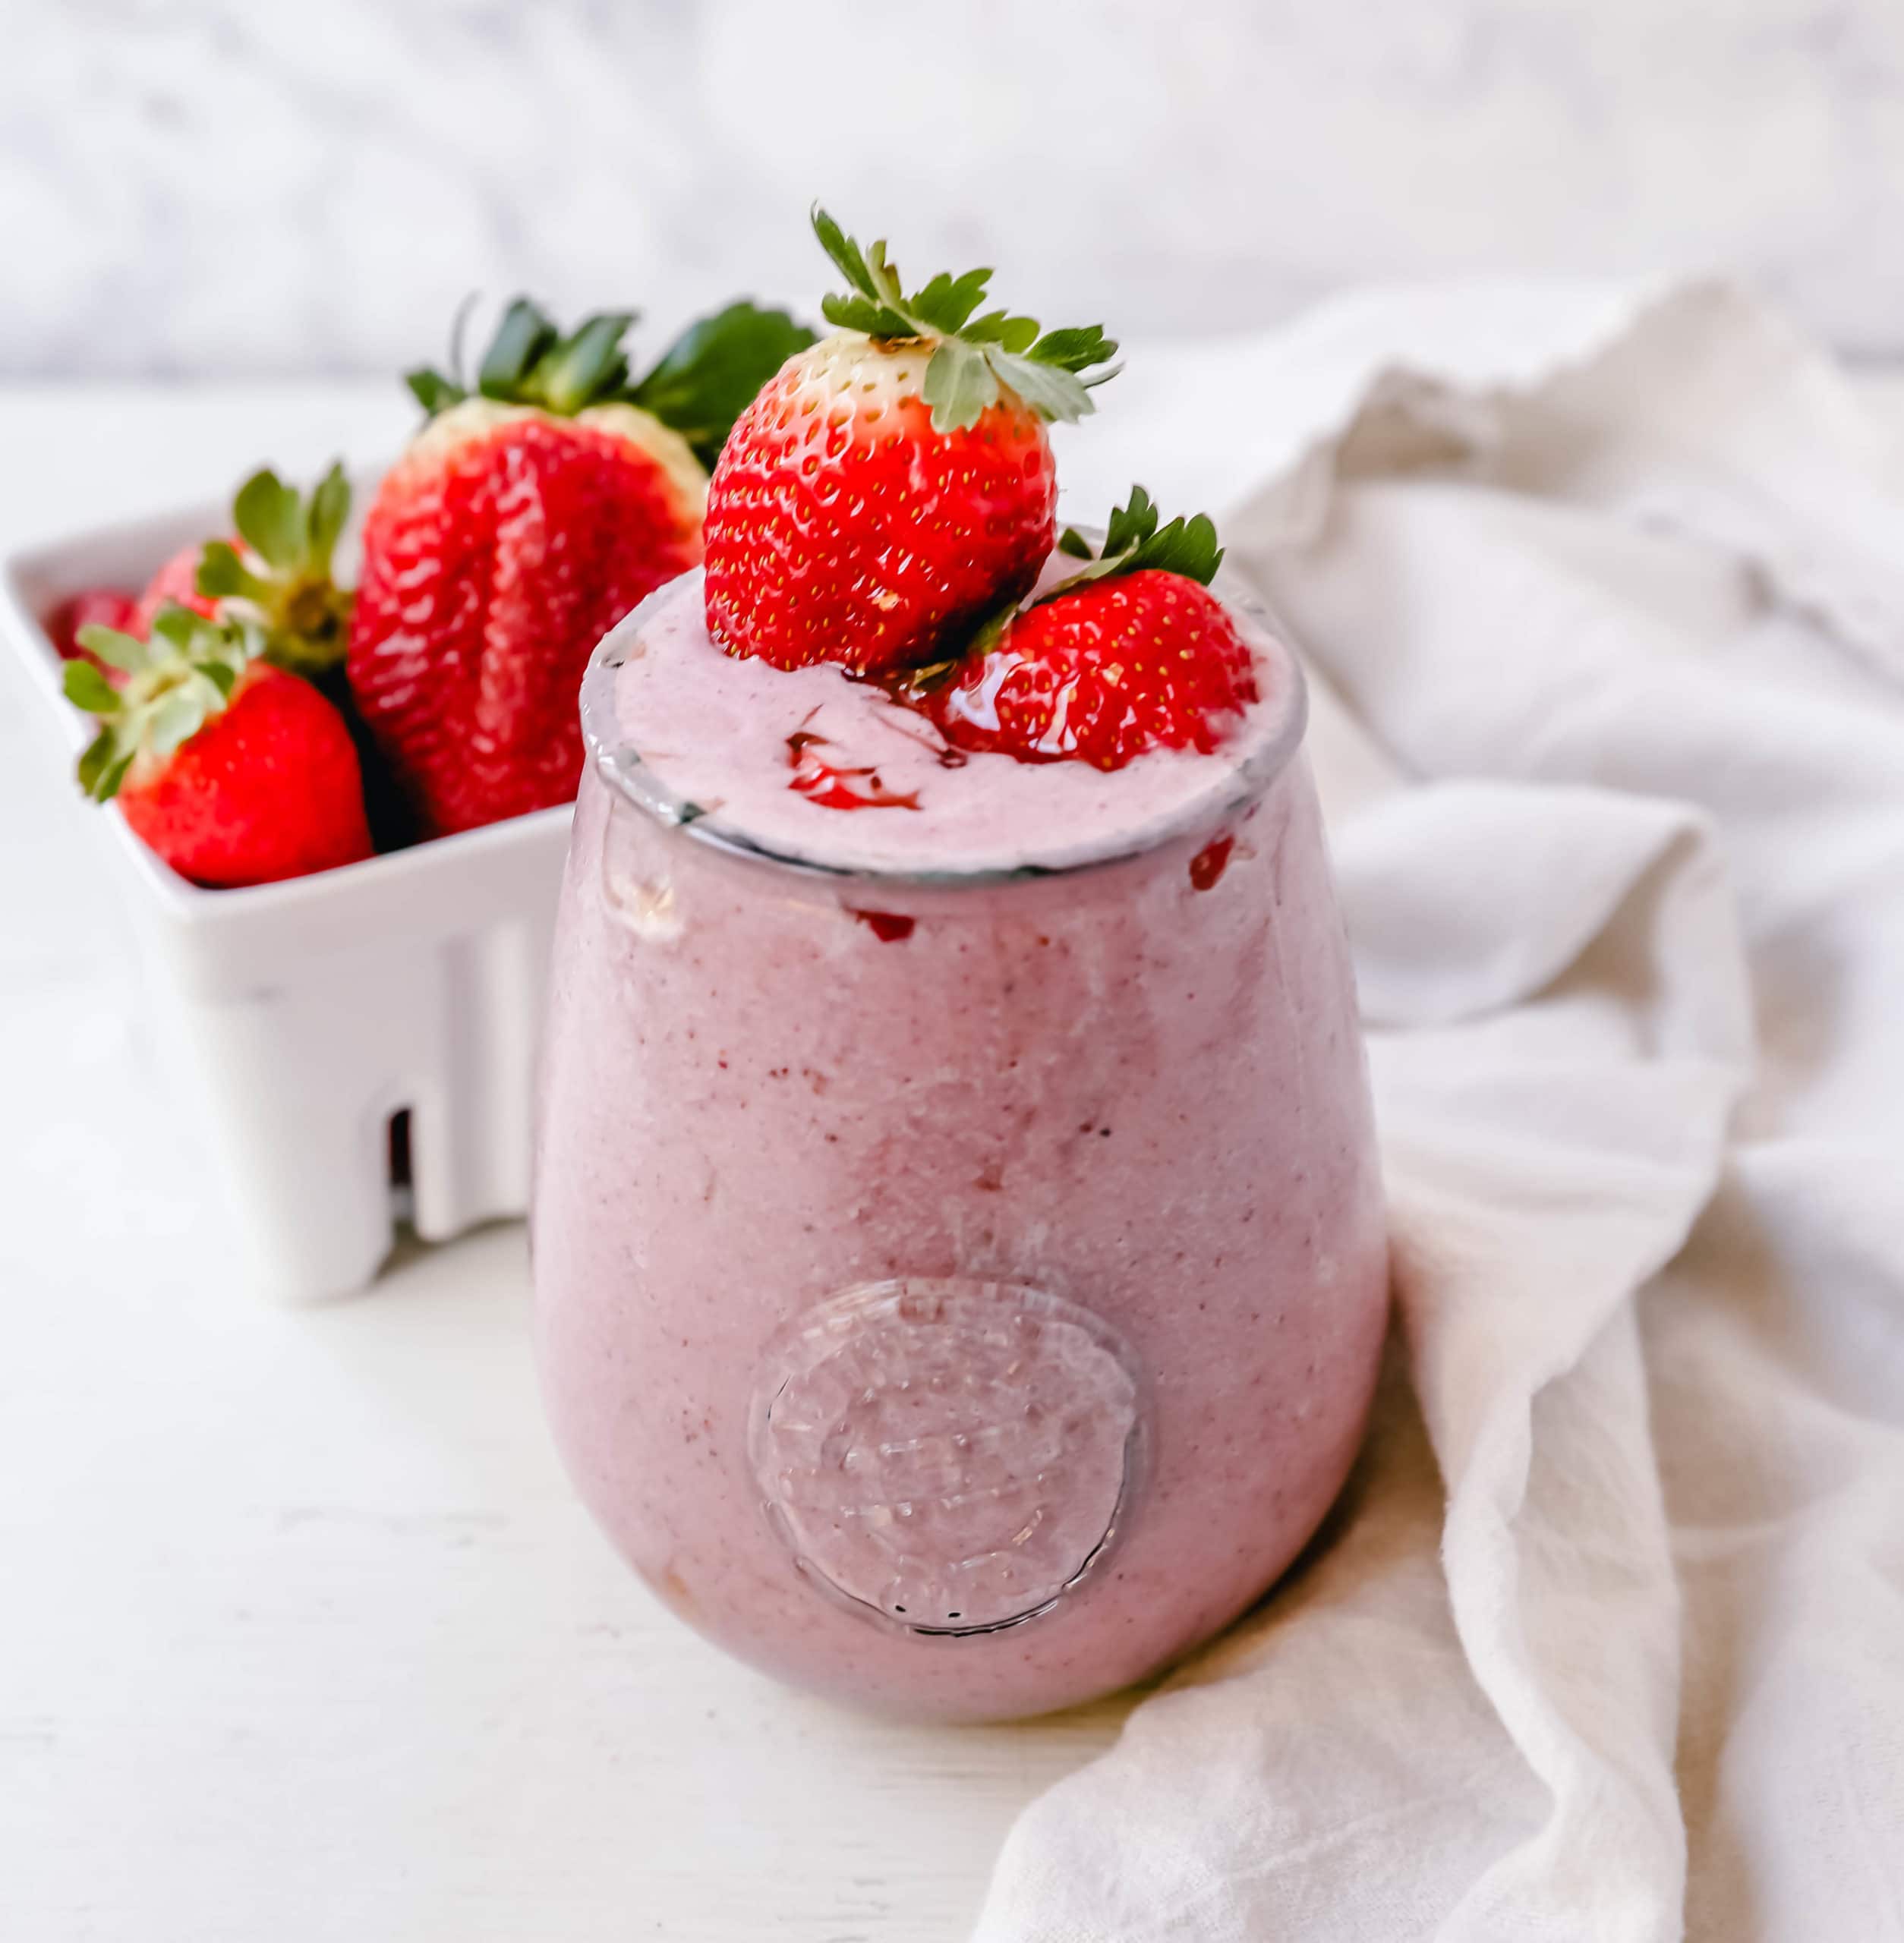 Strawberry Banana Smoothie. Creamy strawberry banana smoothie made with strawberries, bananas, your favorite type of milk, honey, and almond butter (if you want it extra rich and creamy). www.modernhoney.com #smoothie #smoothies #strawberrysmoothie